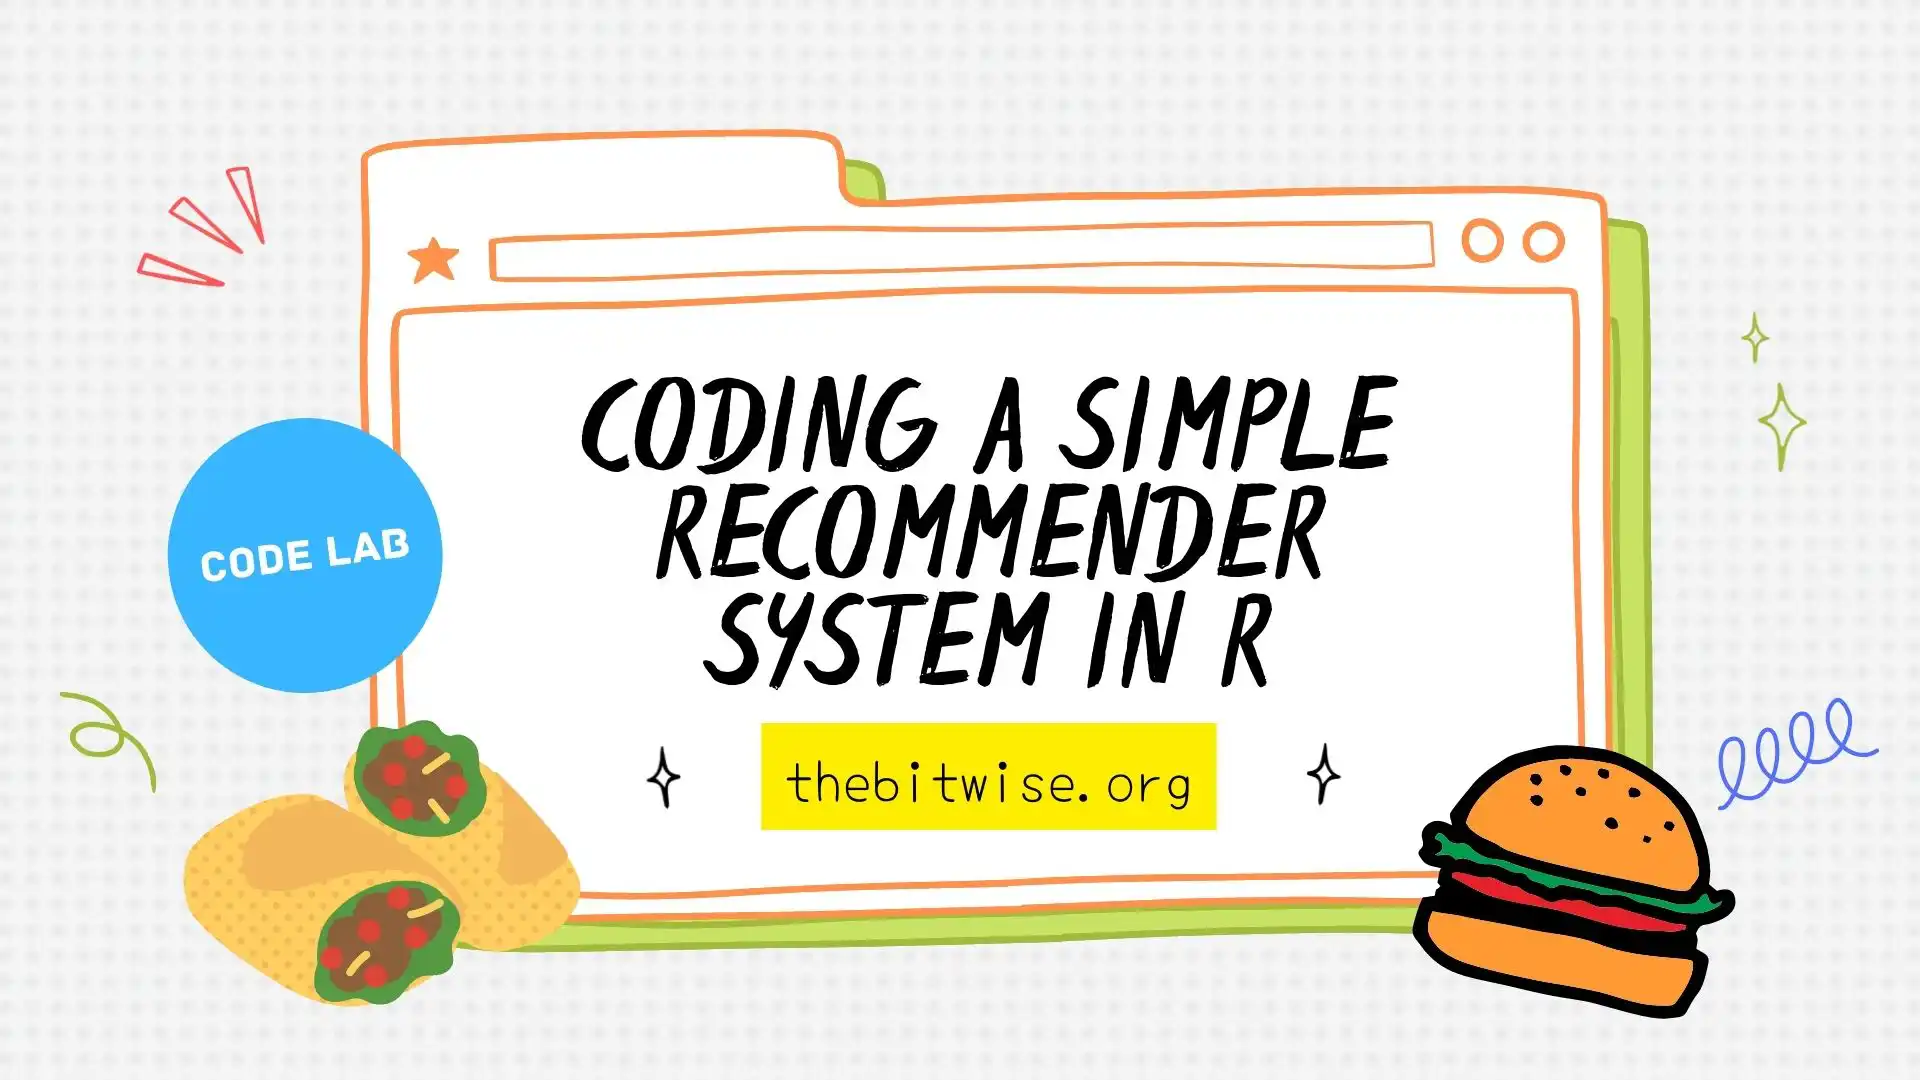 Coding a Simple Recommendation System in R